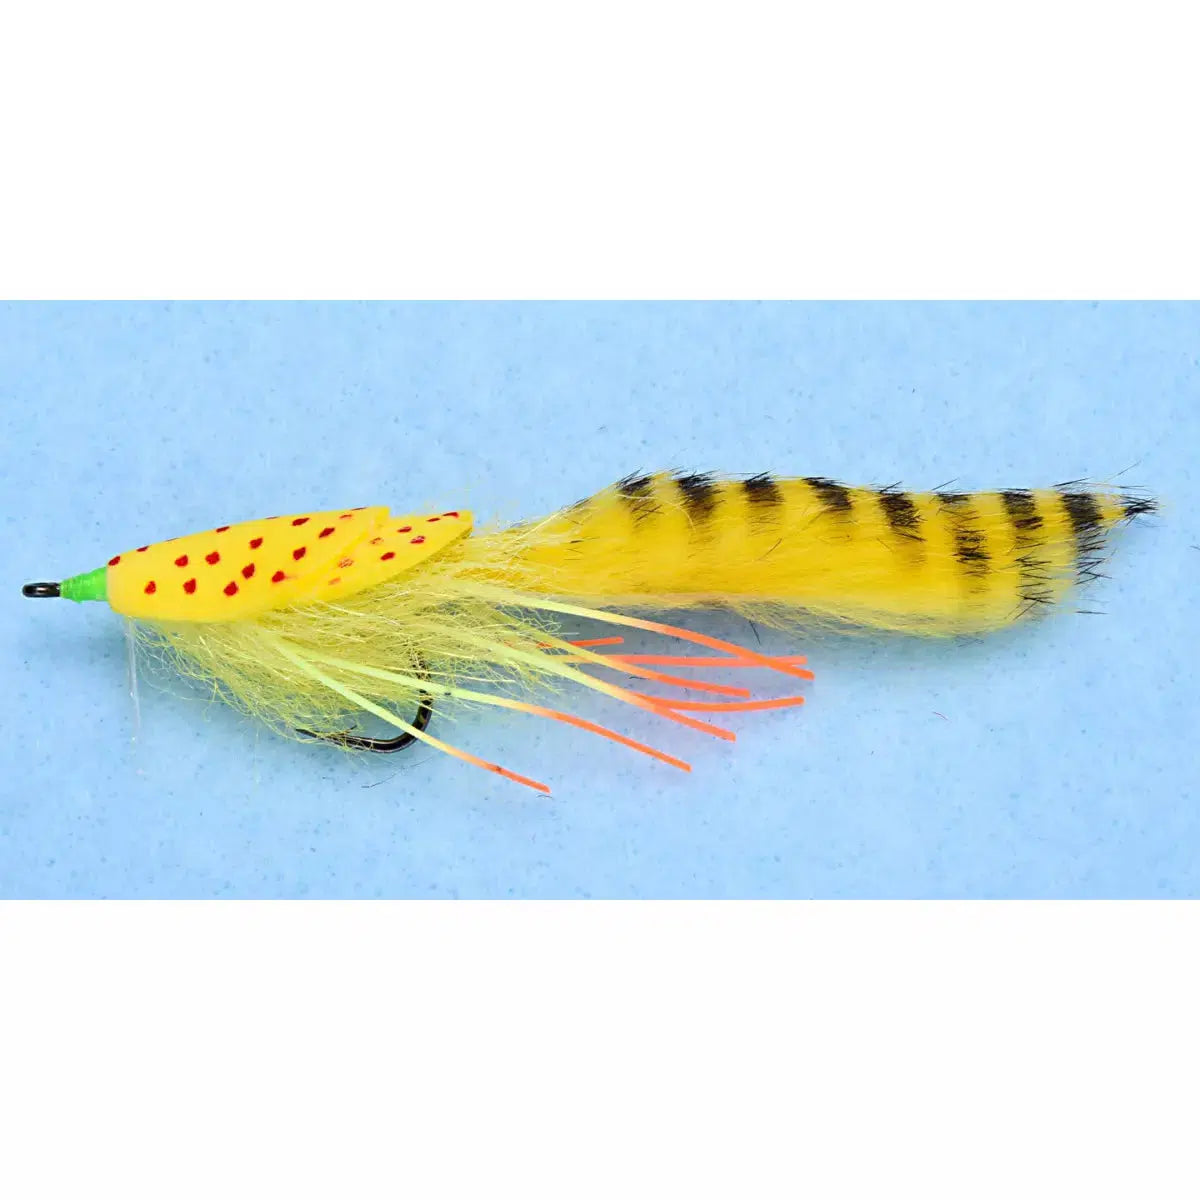 Enrico Puglisi Diver Fly-Lure - Fly-Enrico Puglisi-Yellow-Size #1/0-Fishing Station